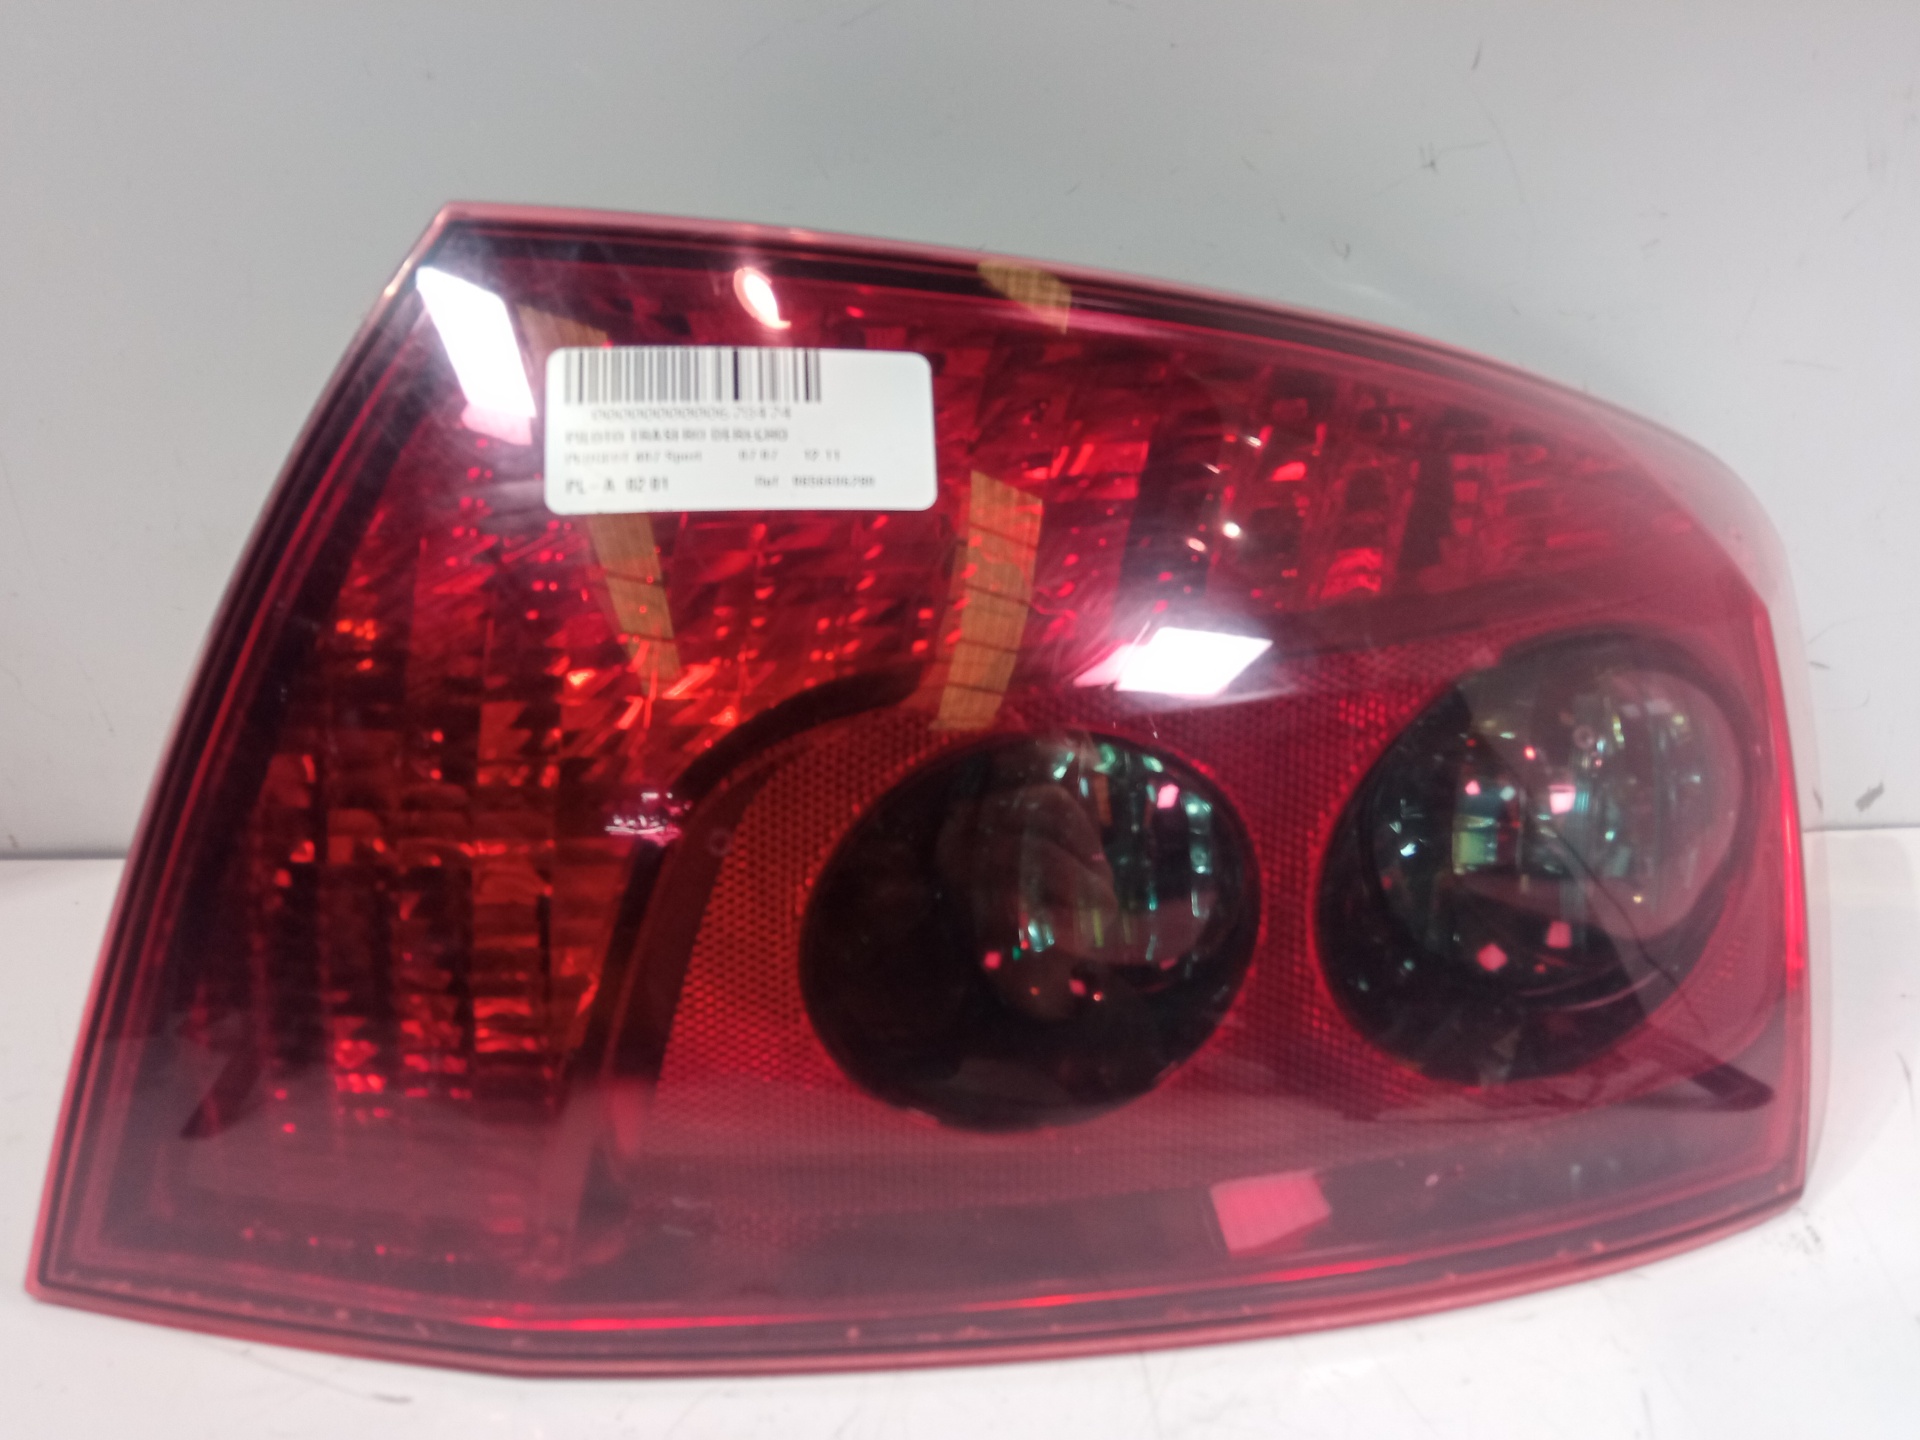 PEUGEOT 407 1 generation (2004-2010) Rear Right Taillight Lamp 9656606280, 6PINES 24869461